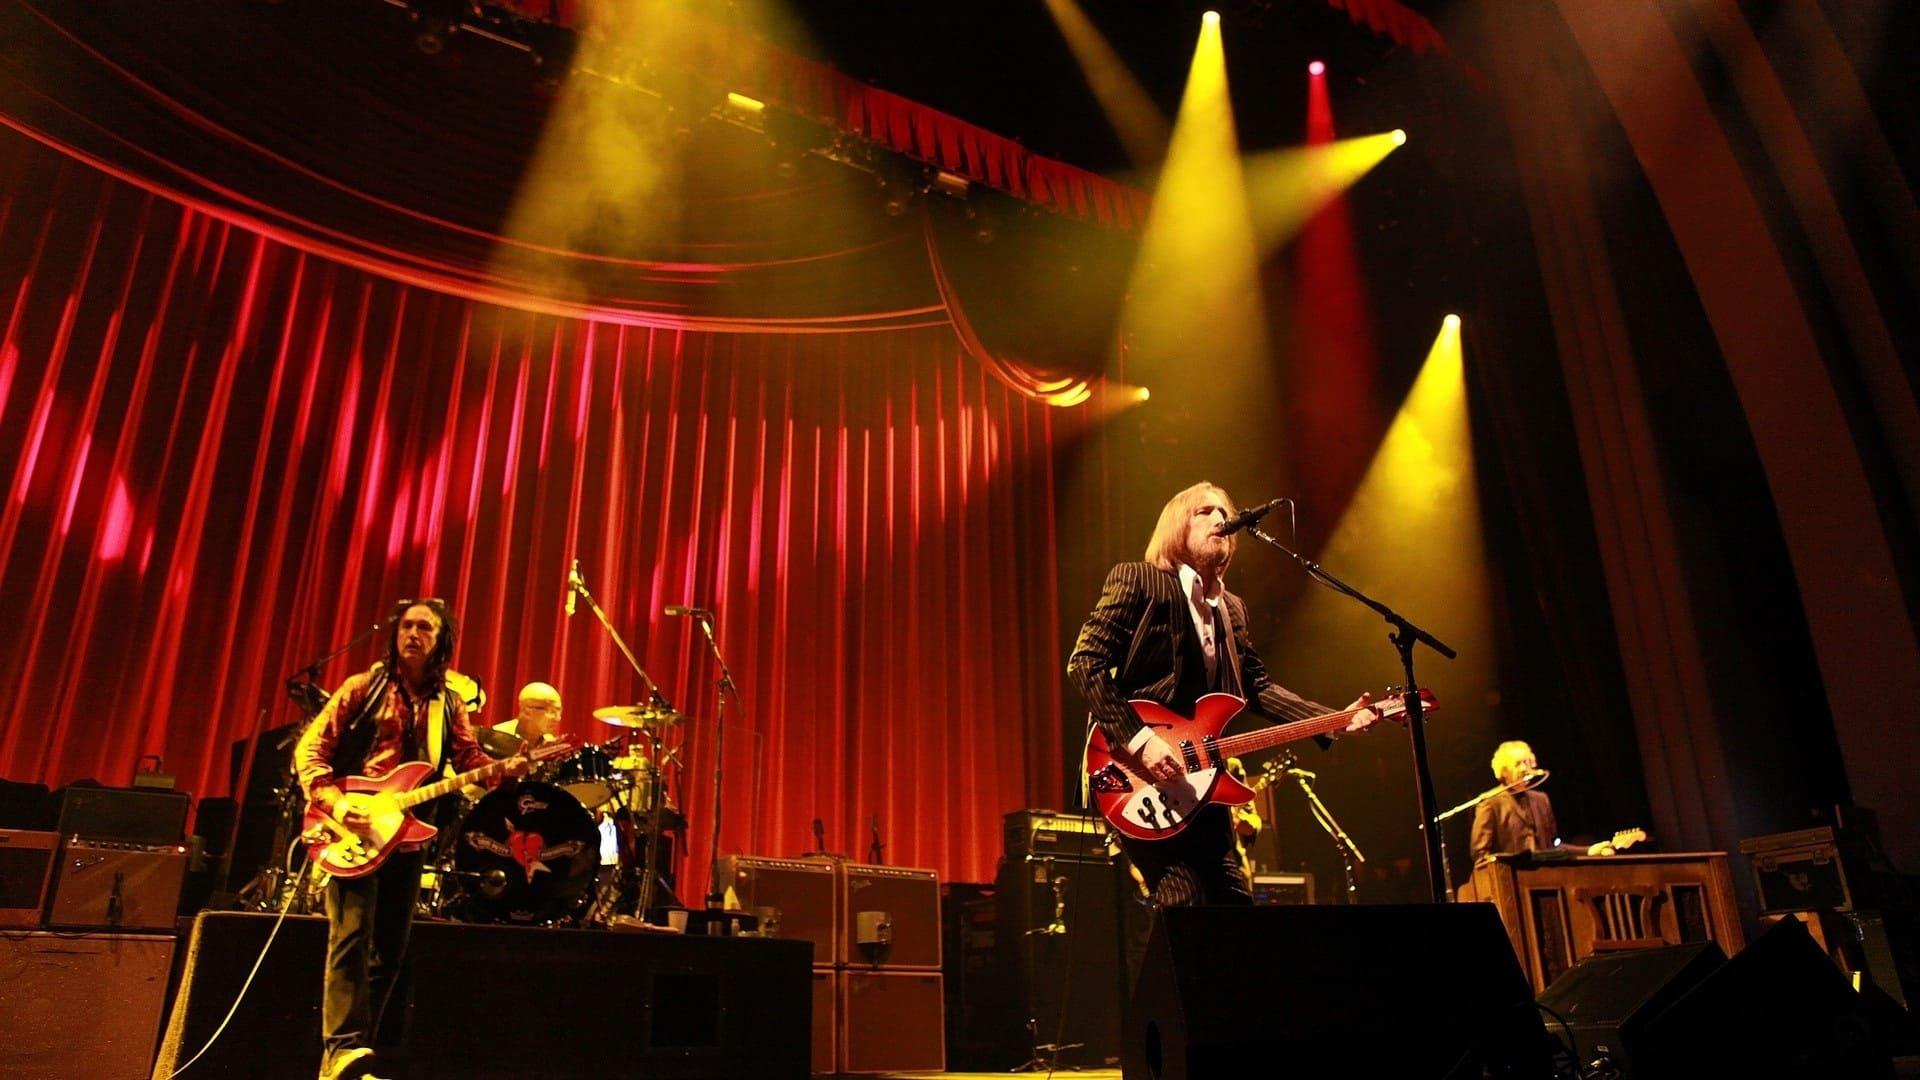 Tom Petty & The Heartbreakers: Live in Concert backdrop